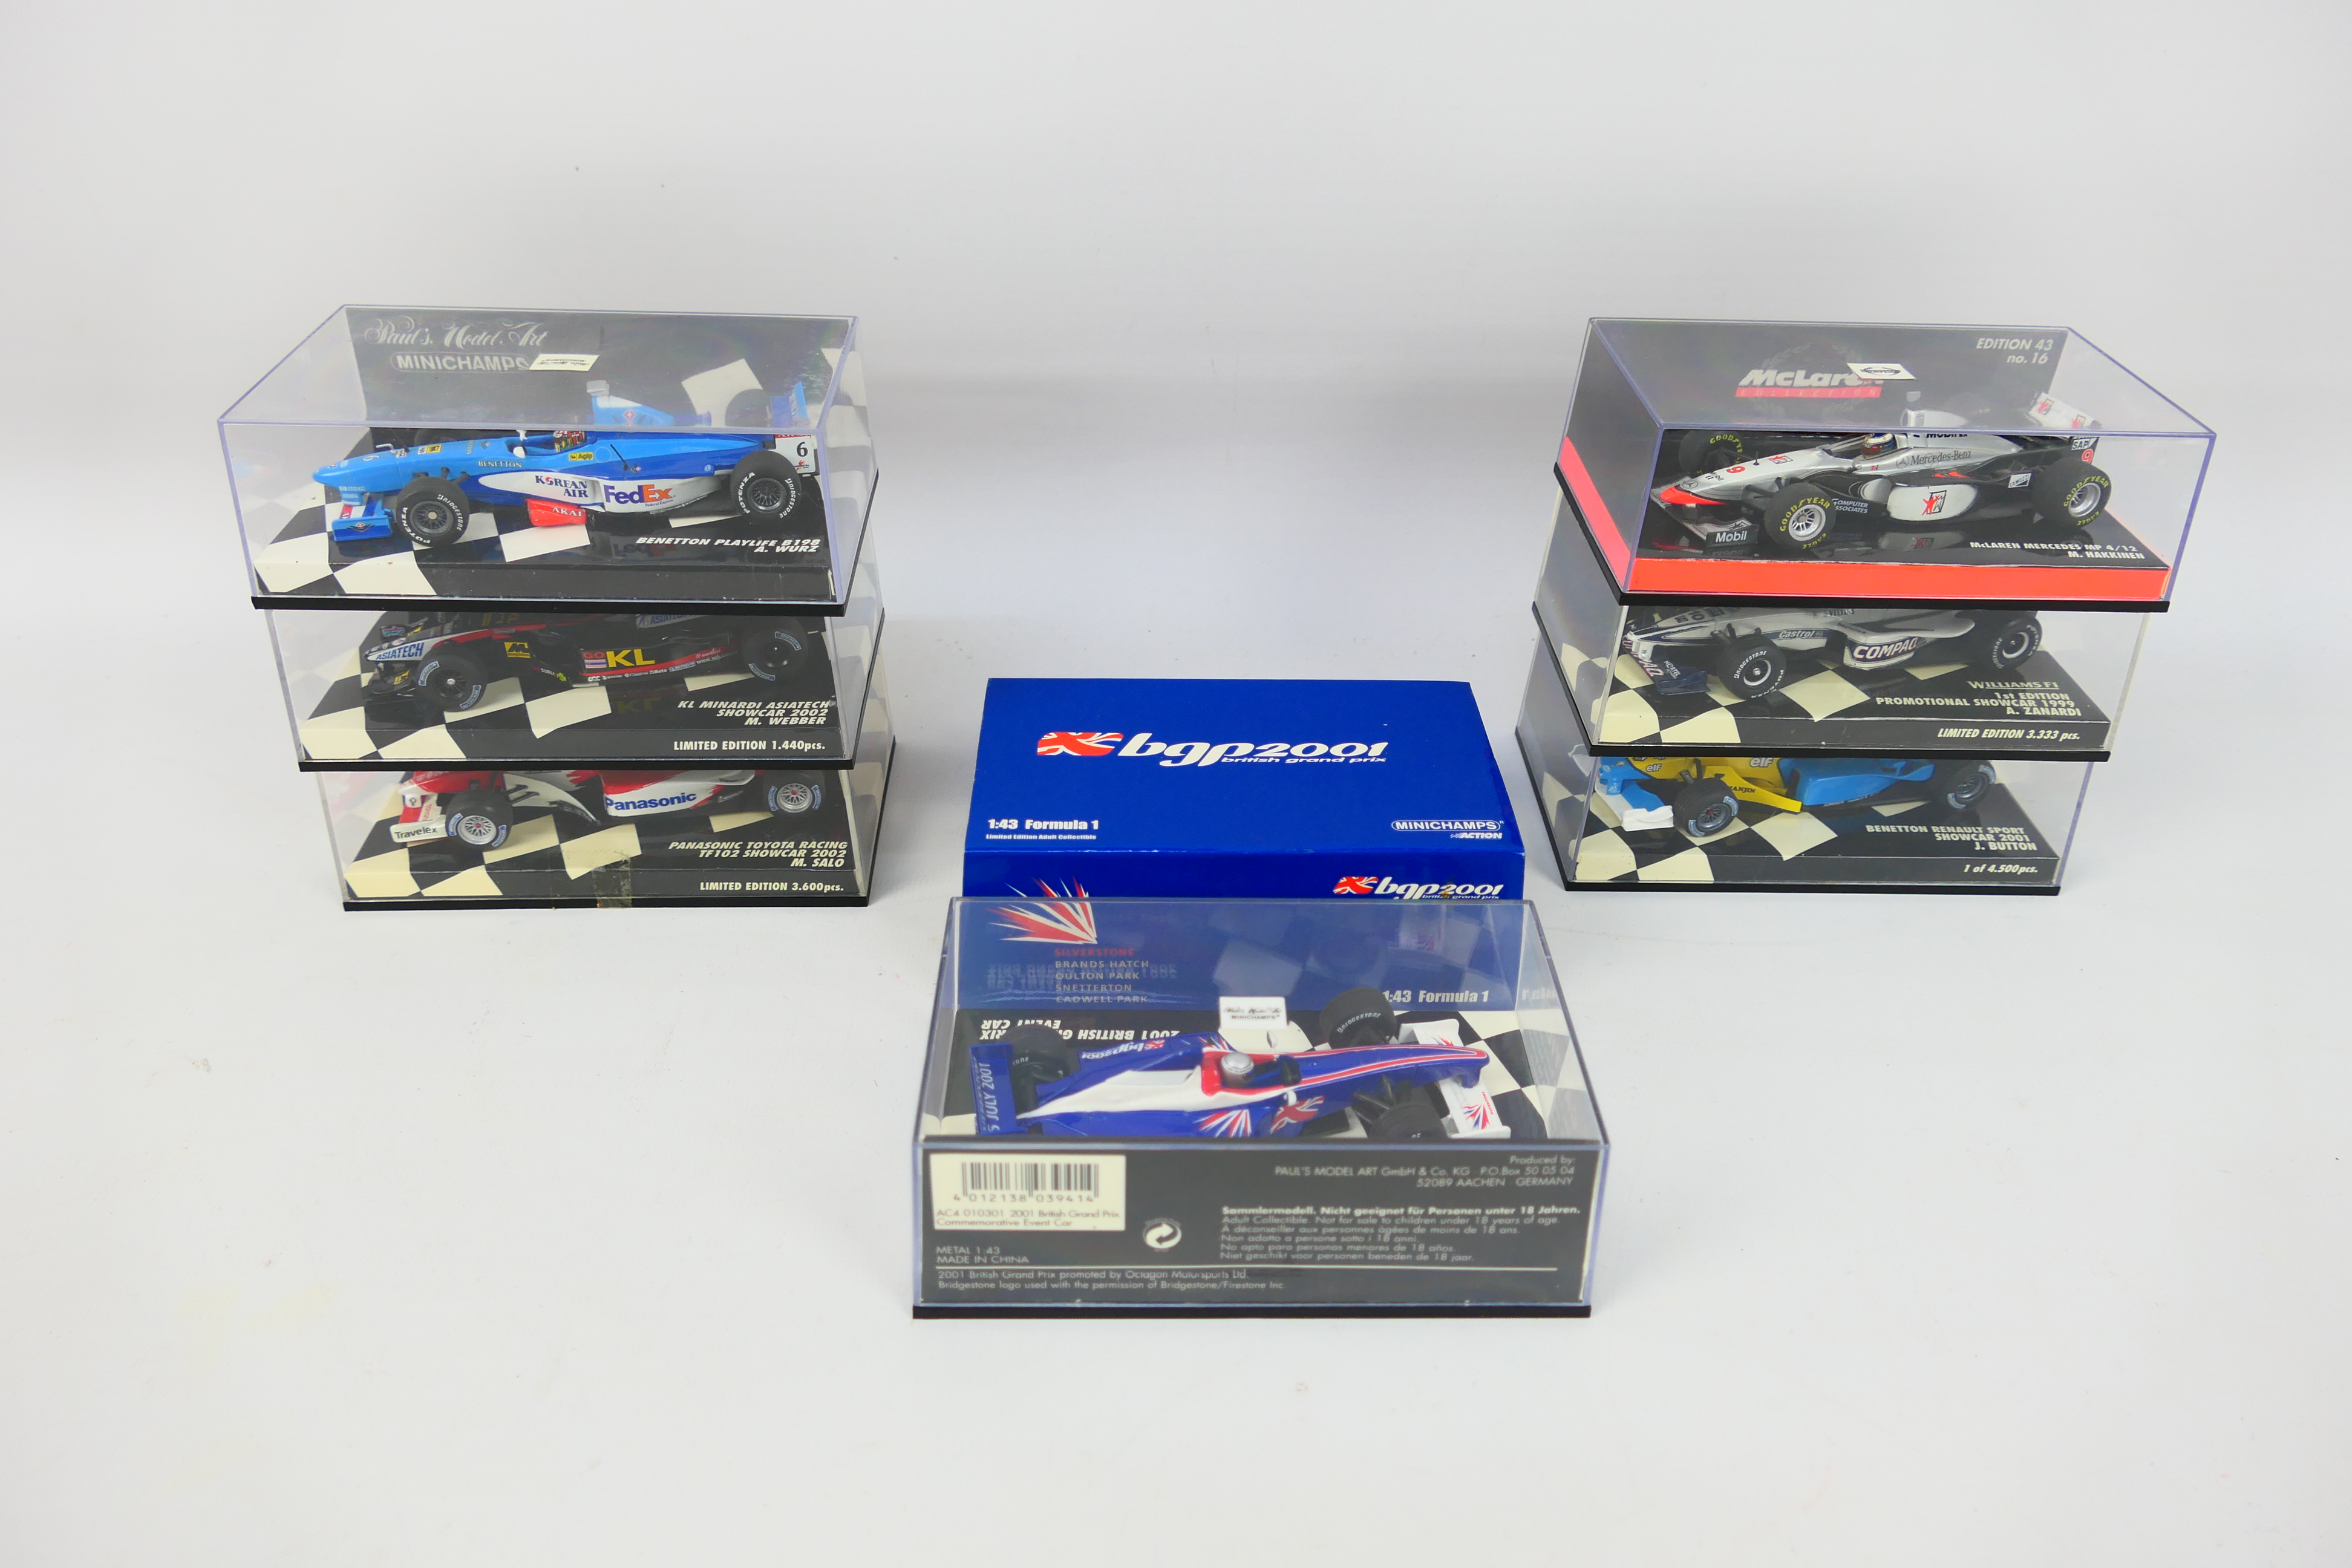 Minichamps - Seven boxed 1:43 scale diecast F1 racing cars from Minichamps. - Image 2 of 8